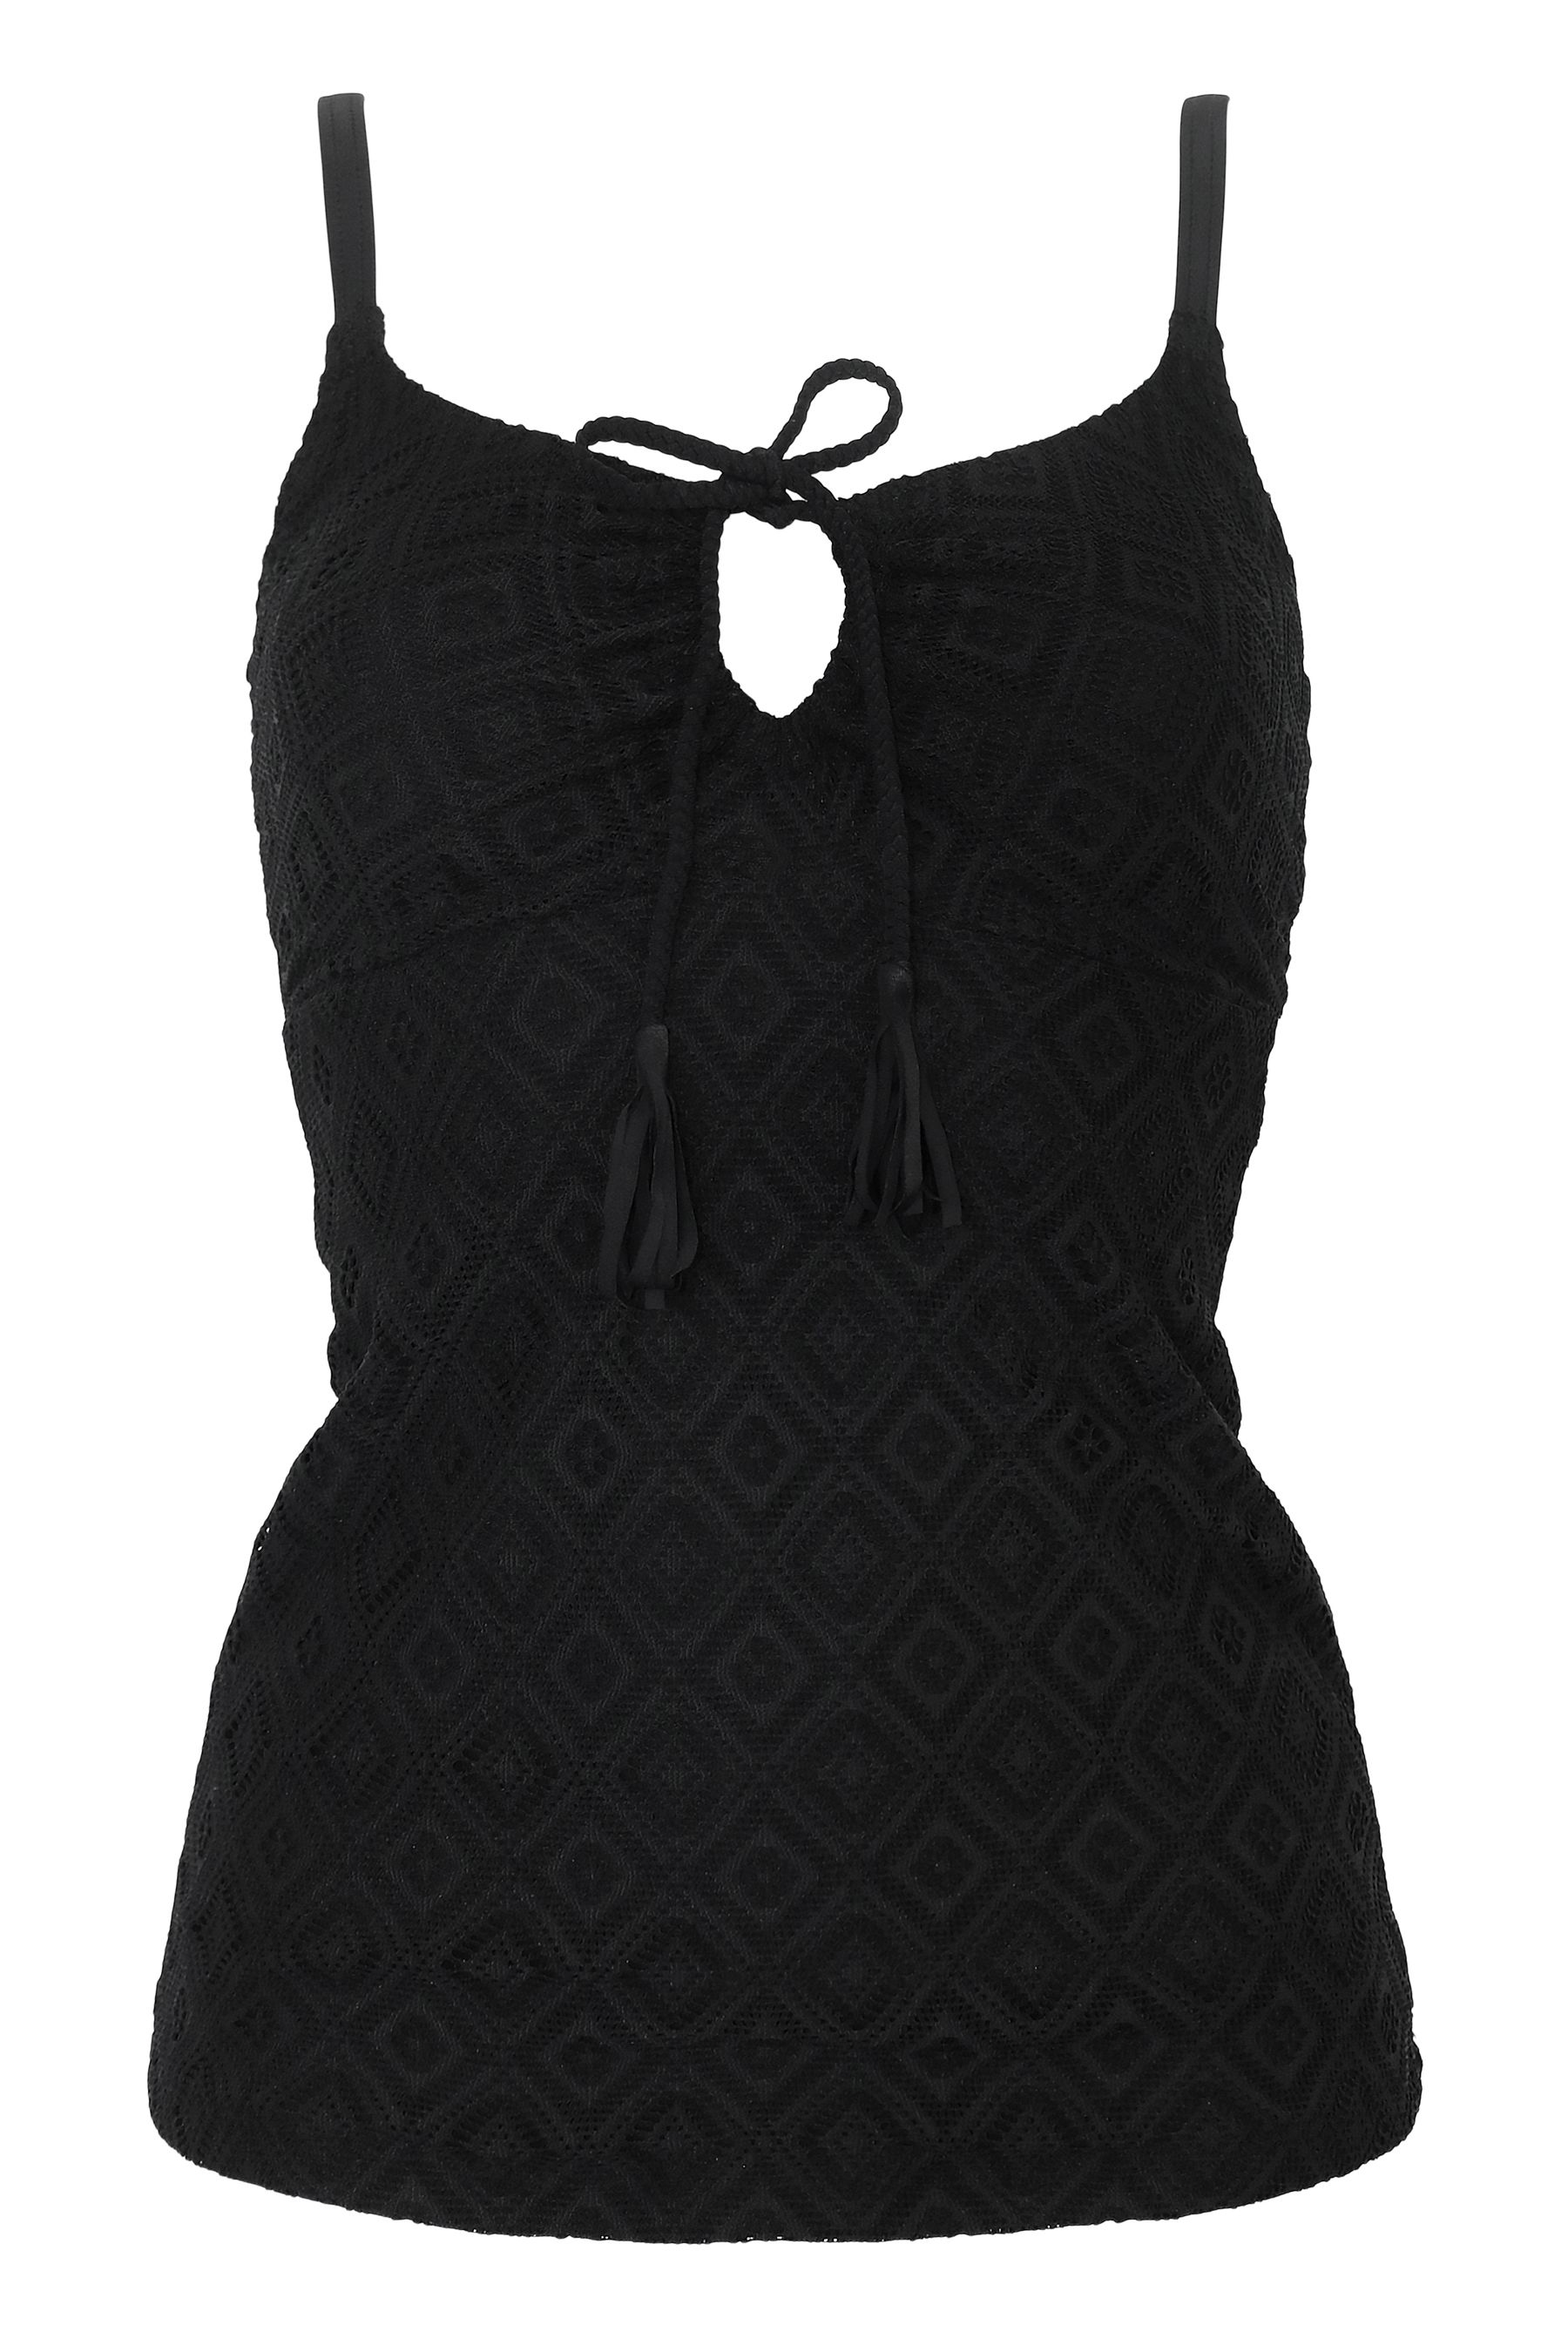 Buy Pour Moi Black Summer Breeze Tankini from the Next UK online shop